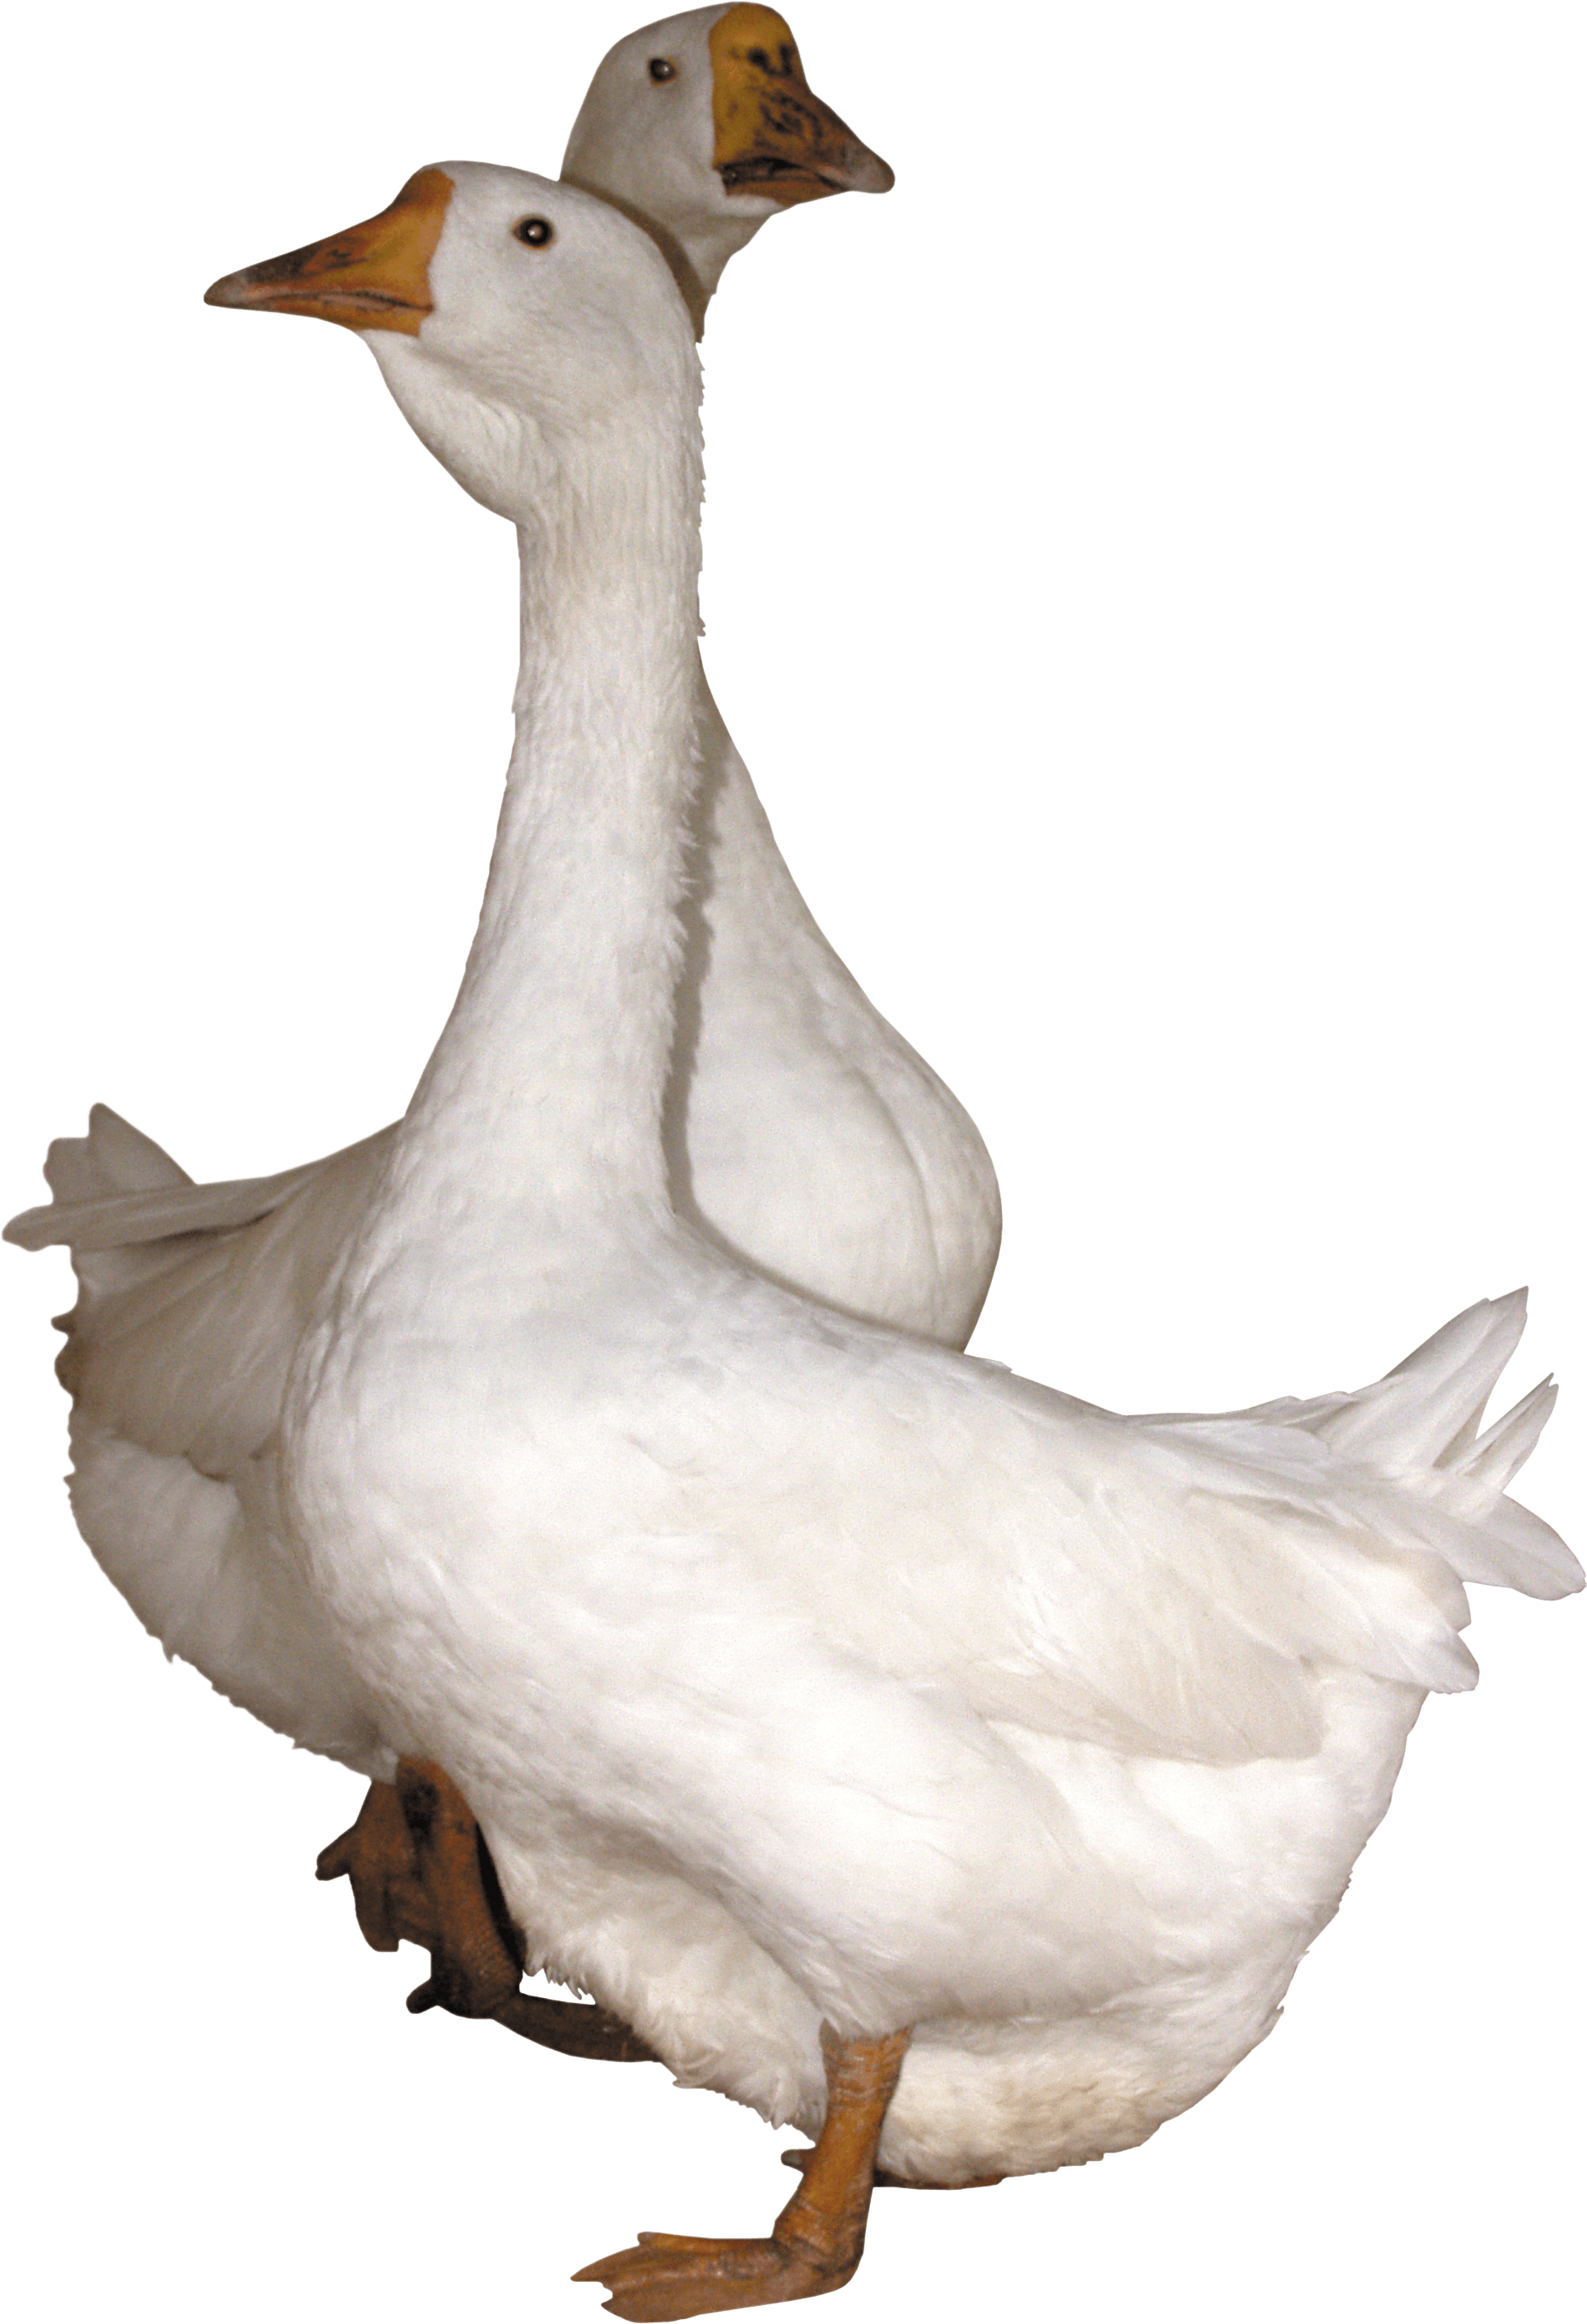 A White Goose With Black Background